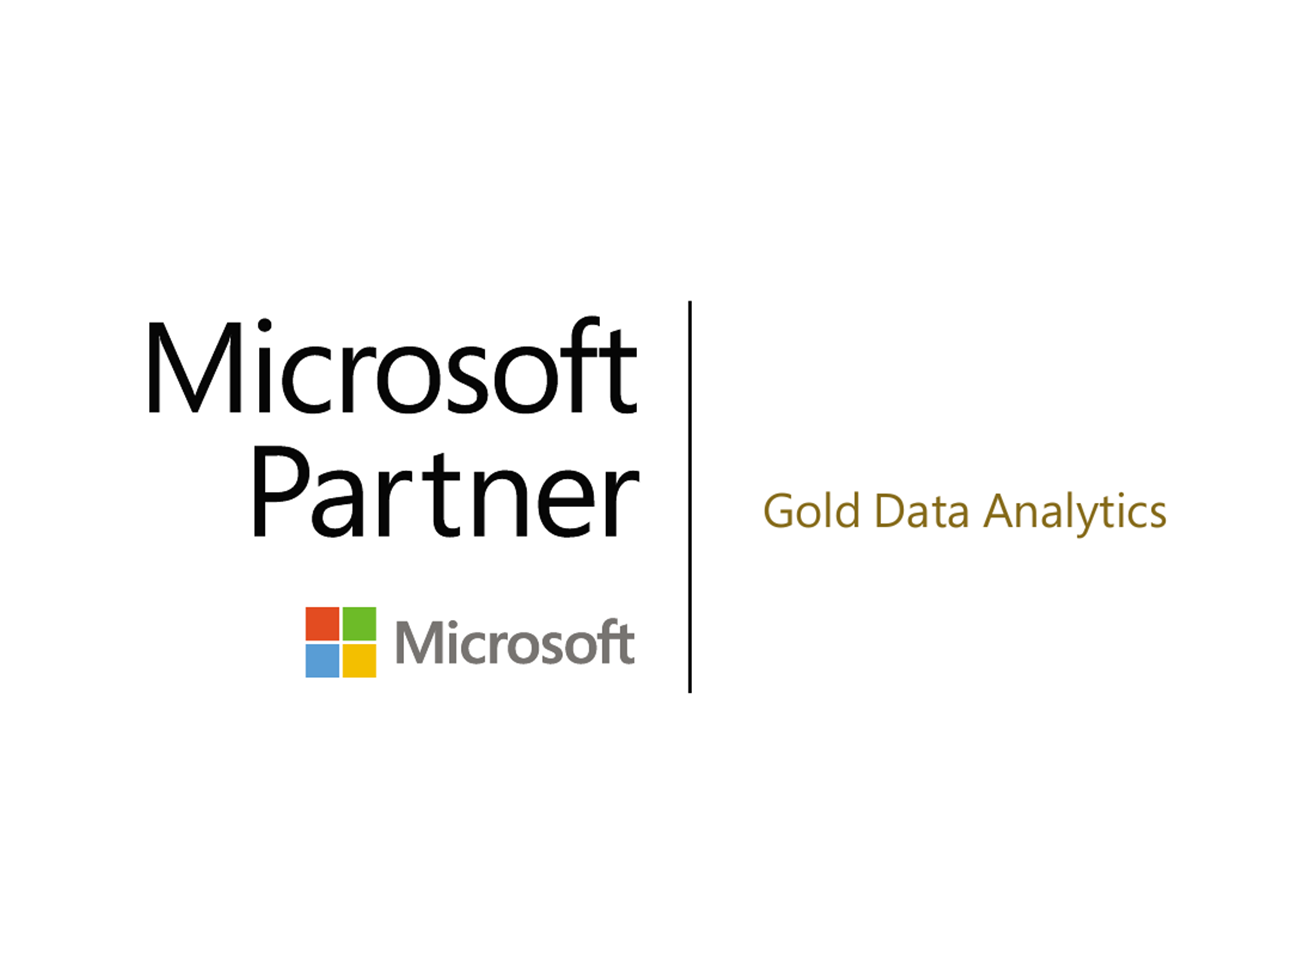 Beltel Datanomics received gold from Microsoft